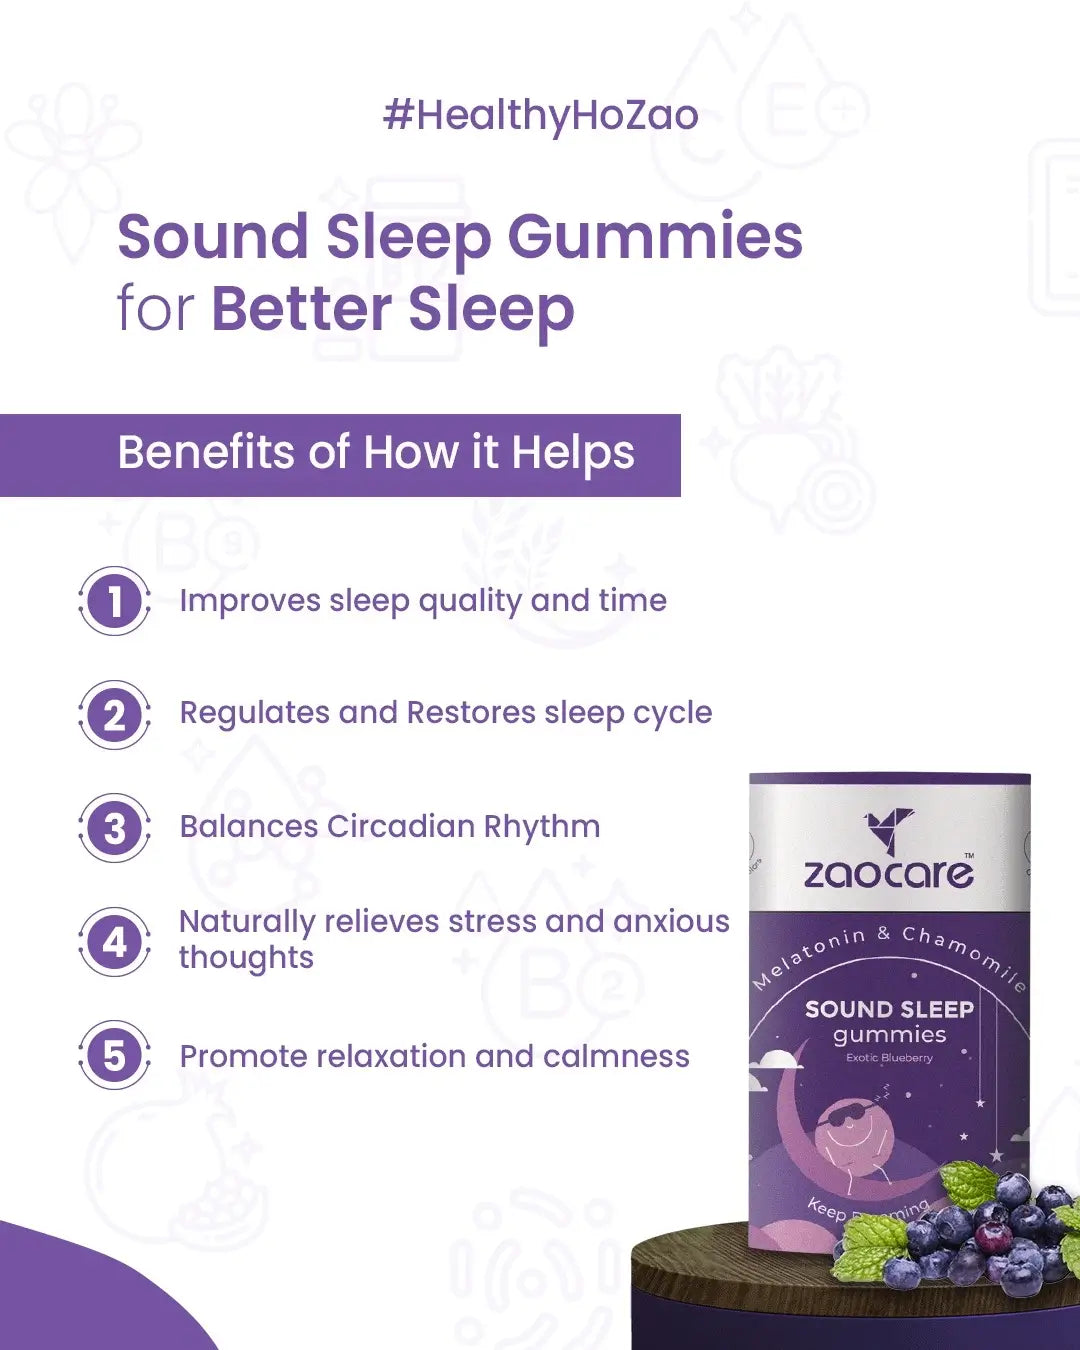 Benefits of Sleep Gummies - it improves sleep quality and time, regulates sleep cycle, promotes relaxation and calmness